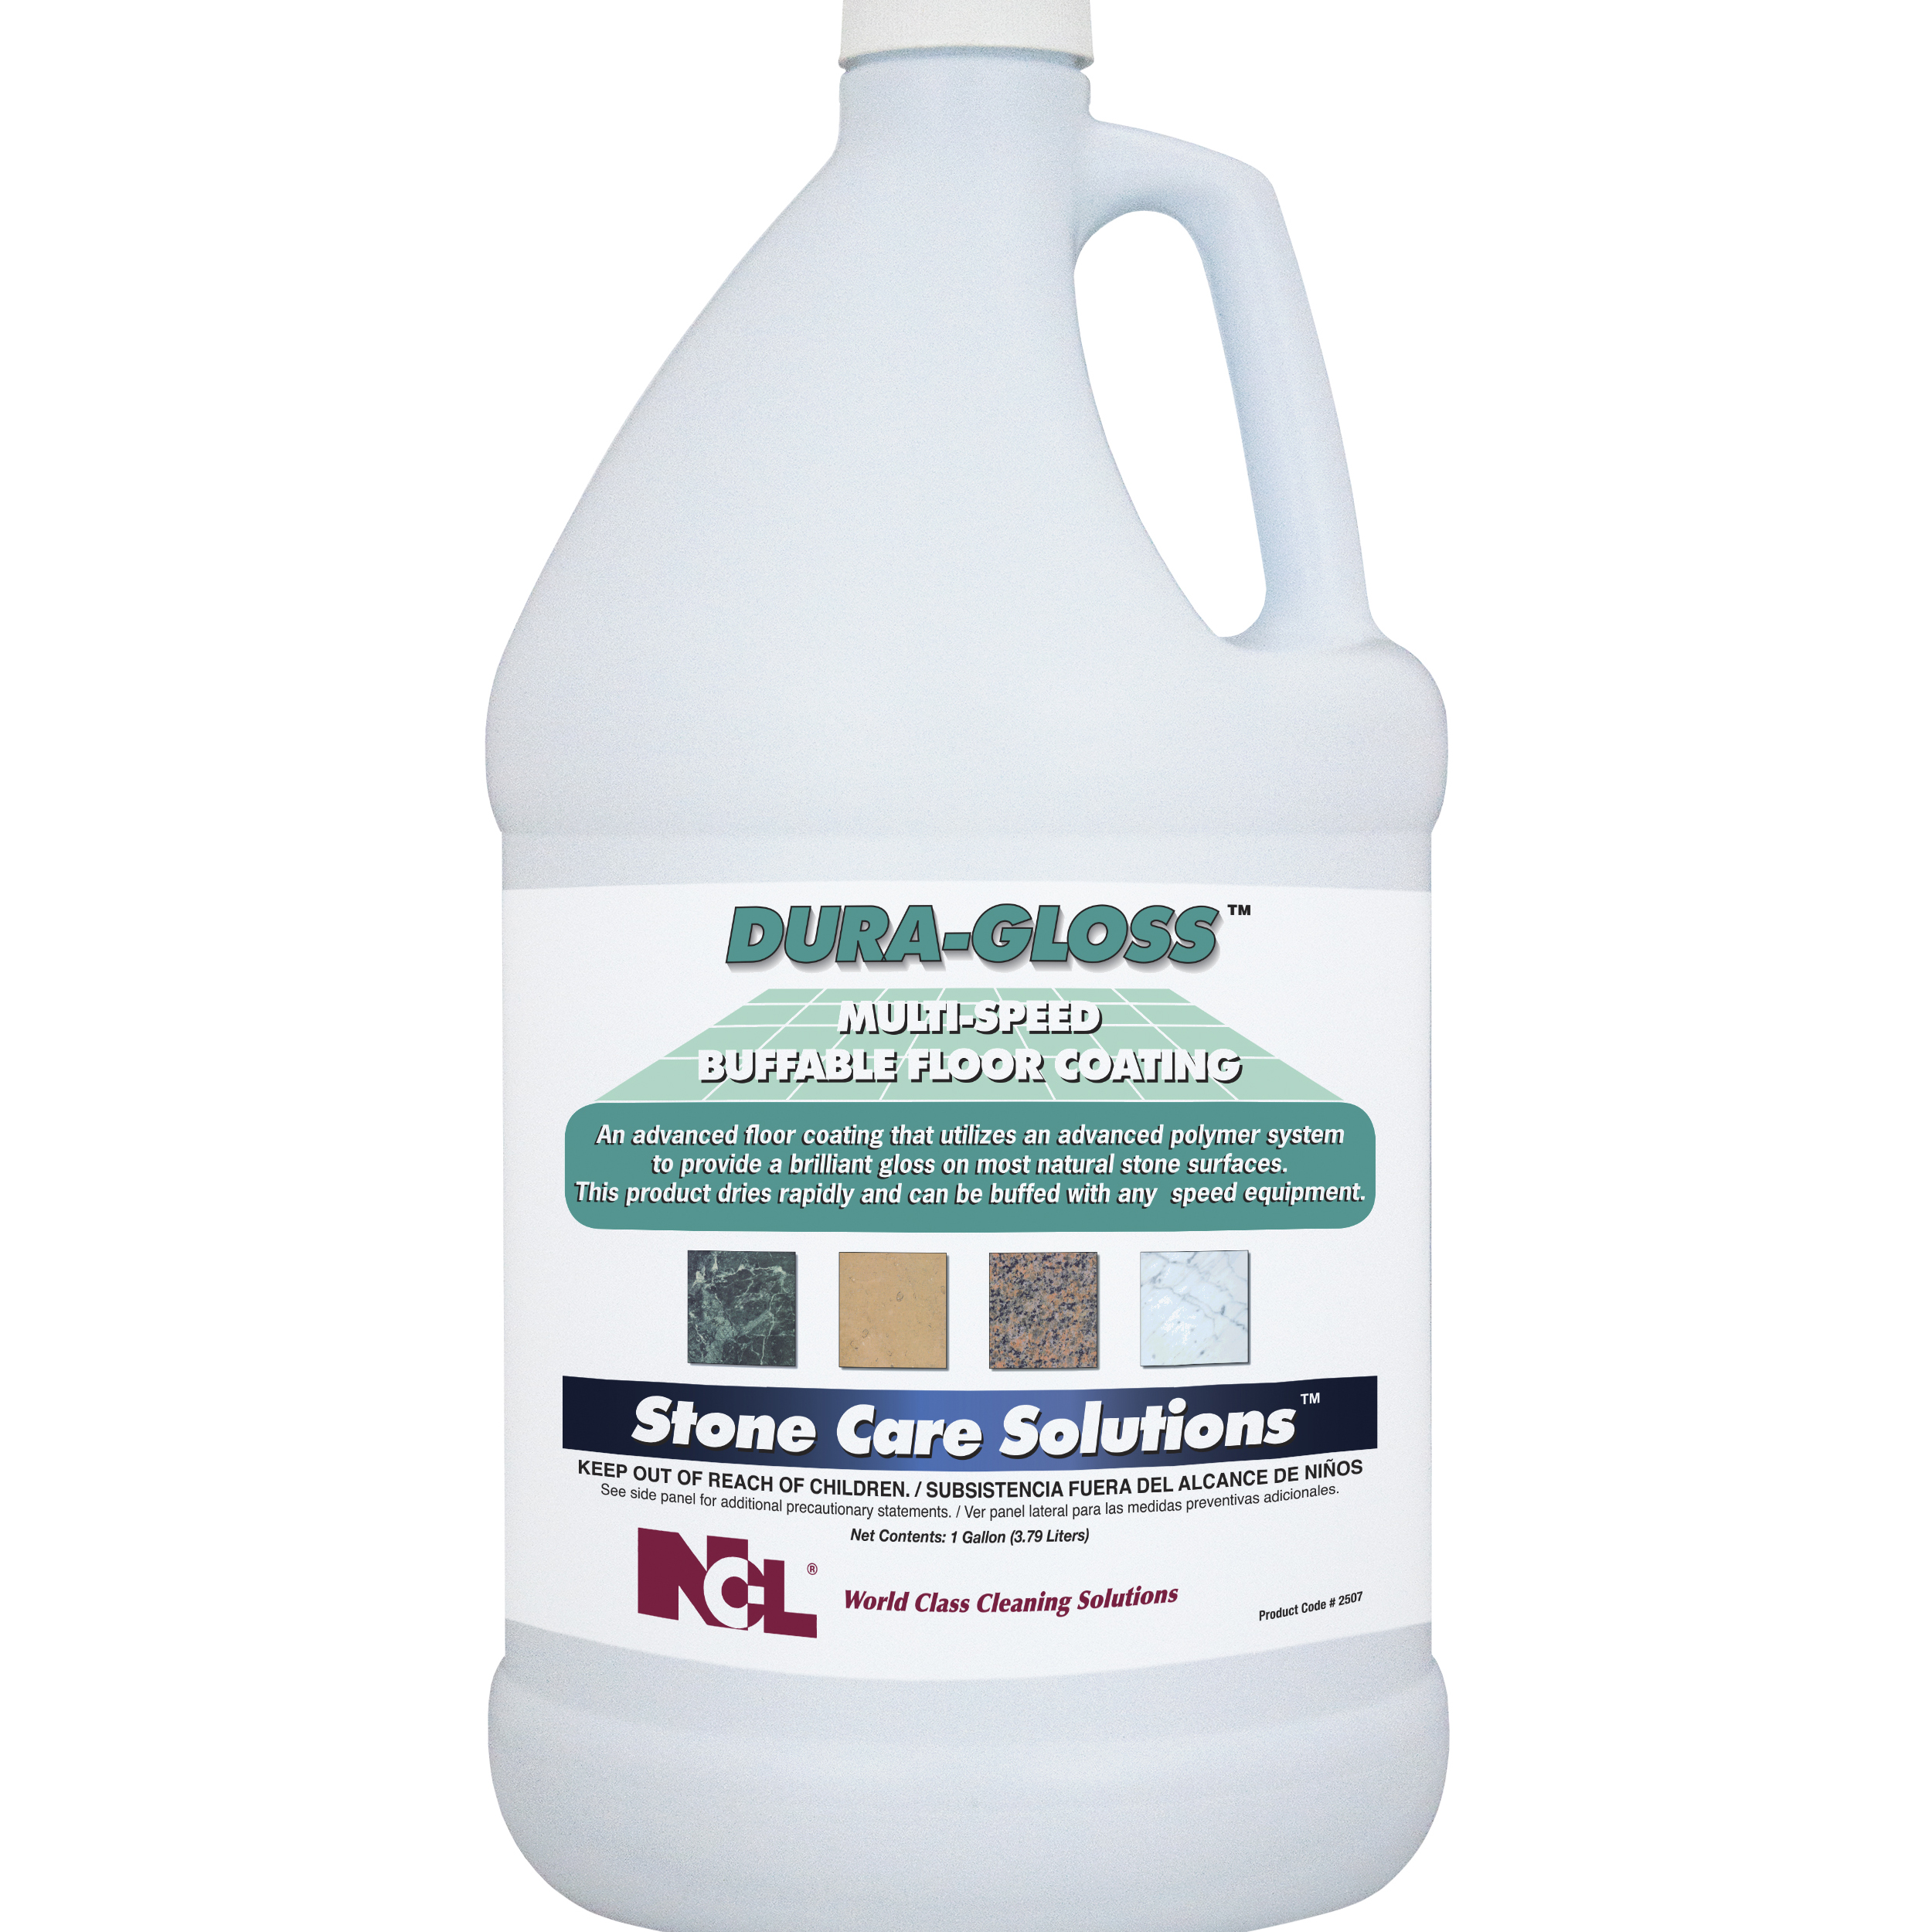  DURA-GLOSS Multi-Speed Buffable Floor Coating 4/1 Gal. Case (NCL2507-29) 